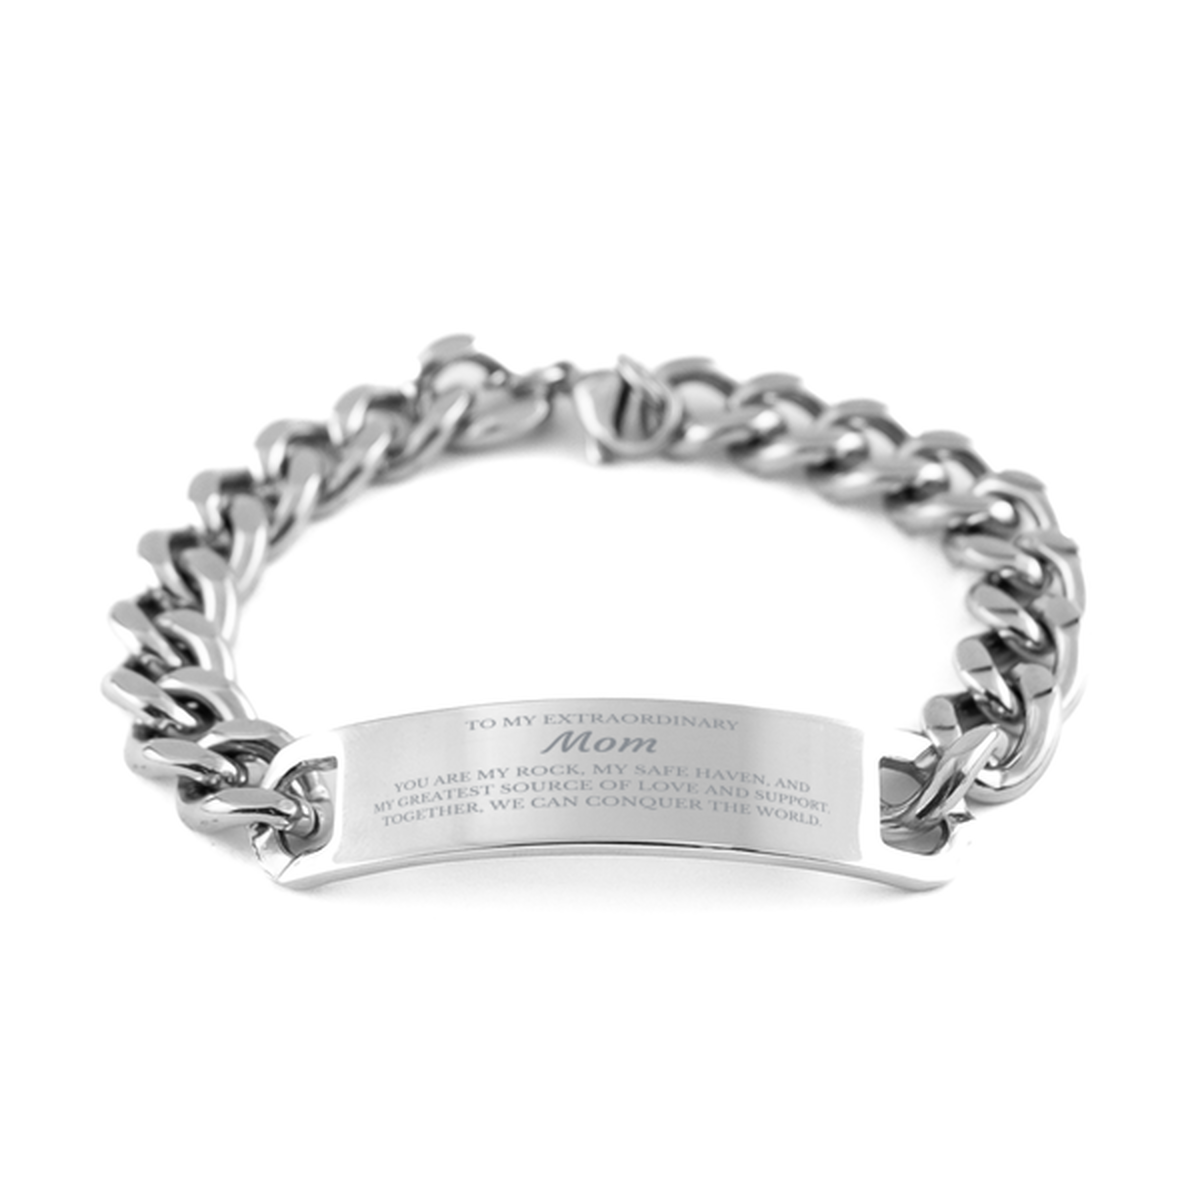 To My Extraordinary Mom Gifts, Together, we can conquer the world, Birthday Cuban Chain Stainless Steel Bracelet For Mom, Christmas Gifts For Mom